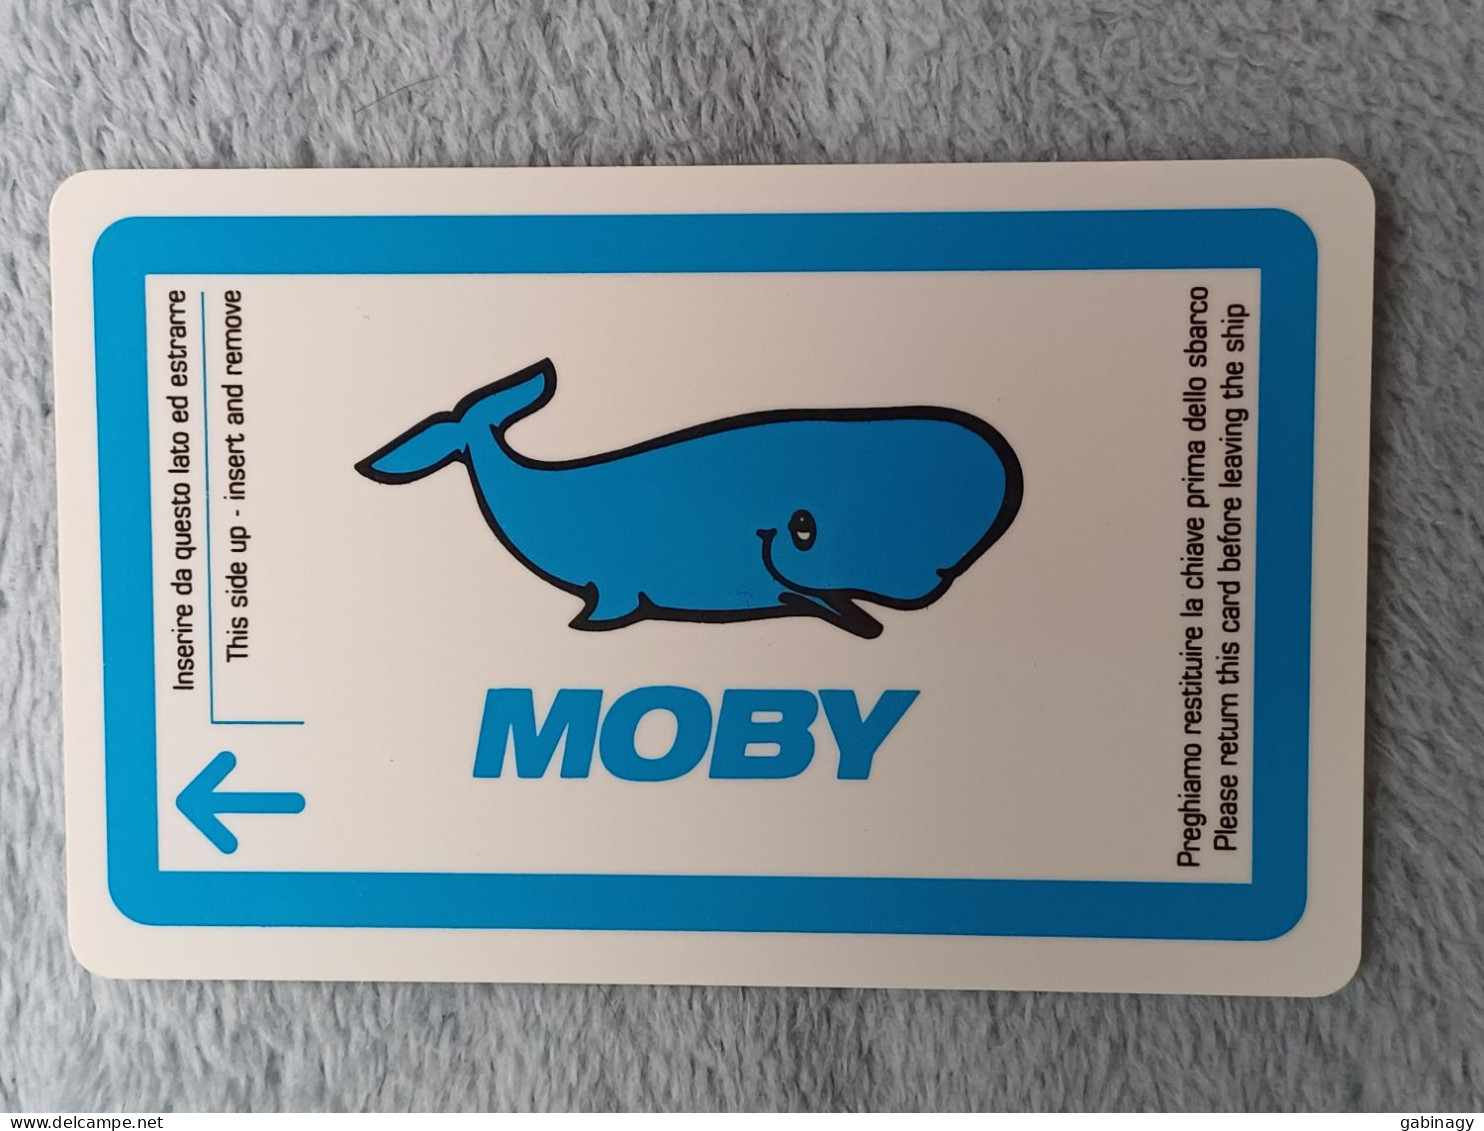 HOTEL KEYS - 2589 - ITALY - MOBY - WHALE - Hotel Keycards